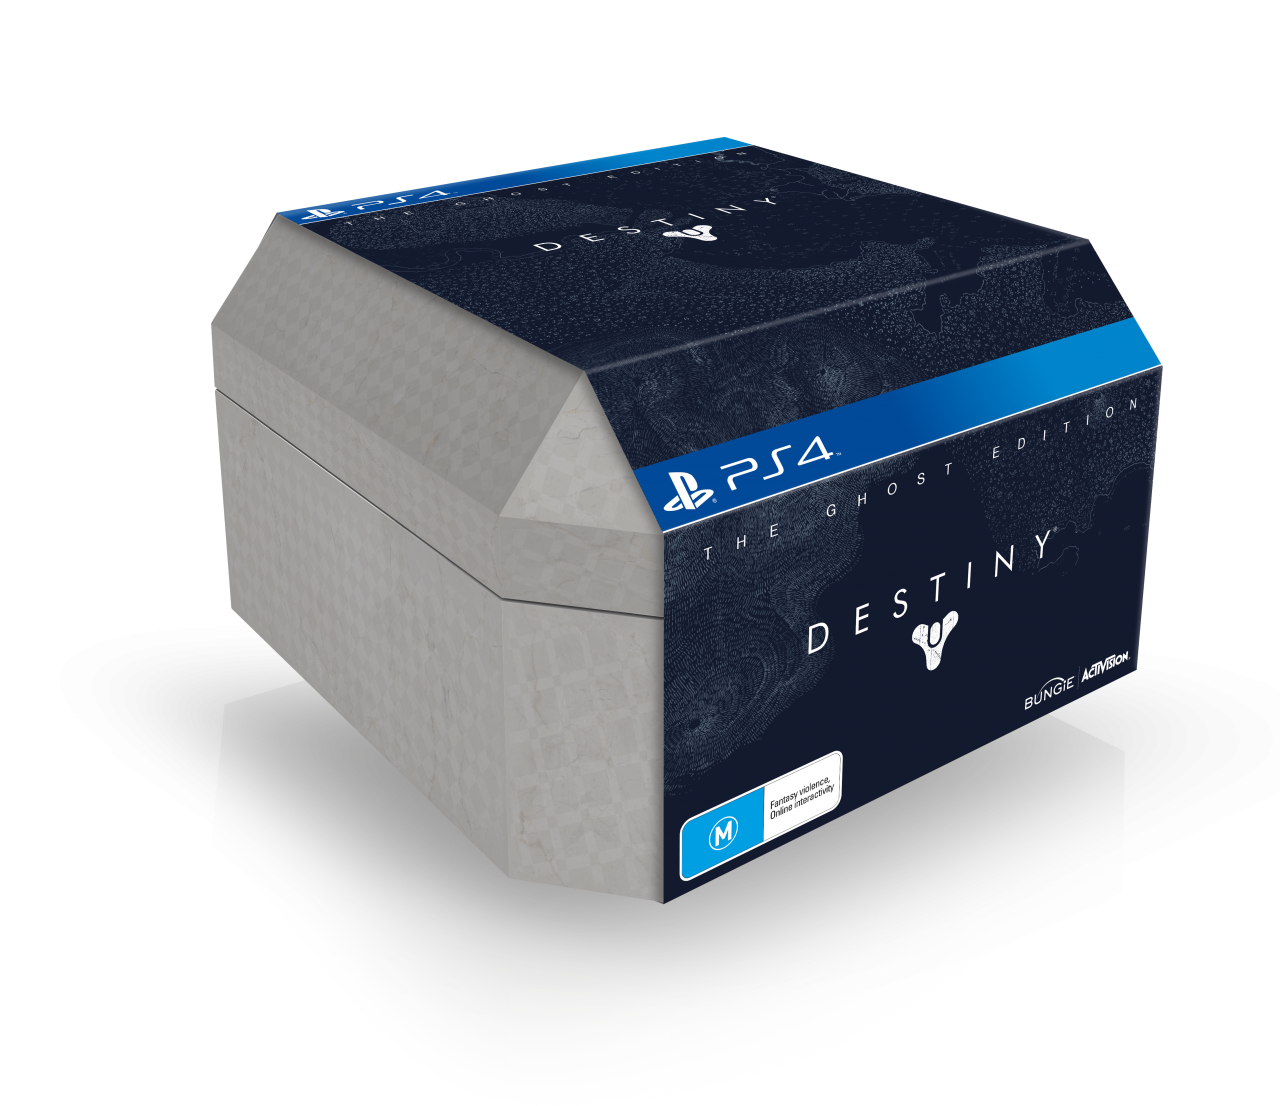 destiny-ghost-edition-ps4